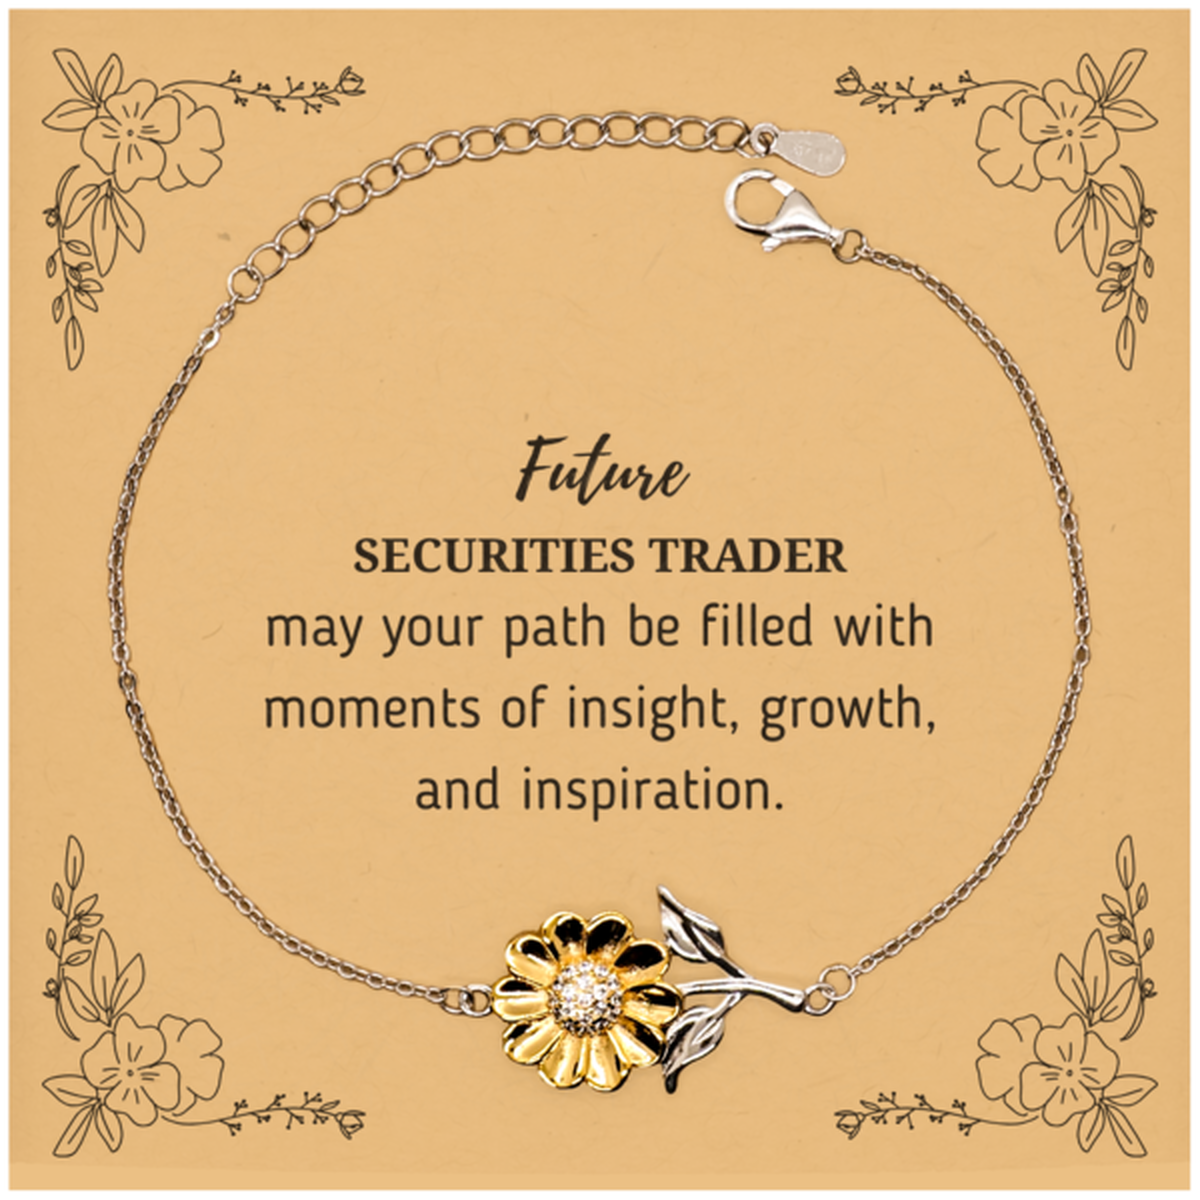 Future Securities Trader Gifts, May your path be filled with moments of insight, Graduation Gifts for New Securities Trader, Christmas Unique Sunflower Bracelet For Men, Women, Friends